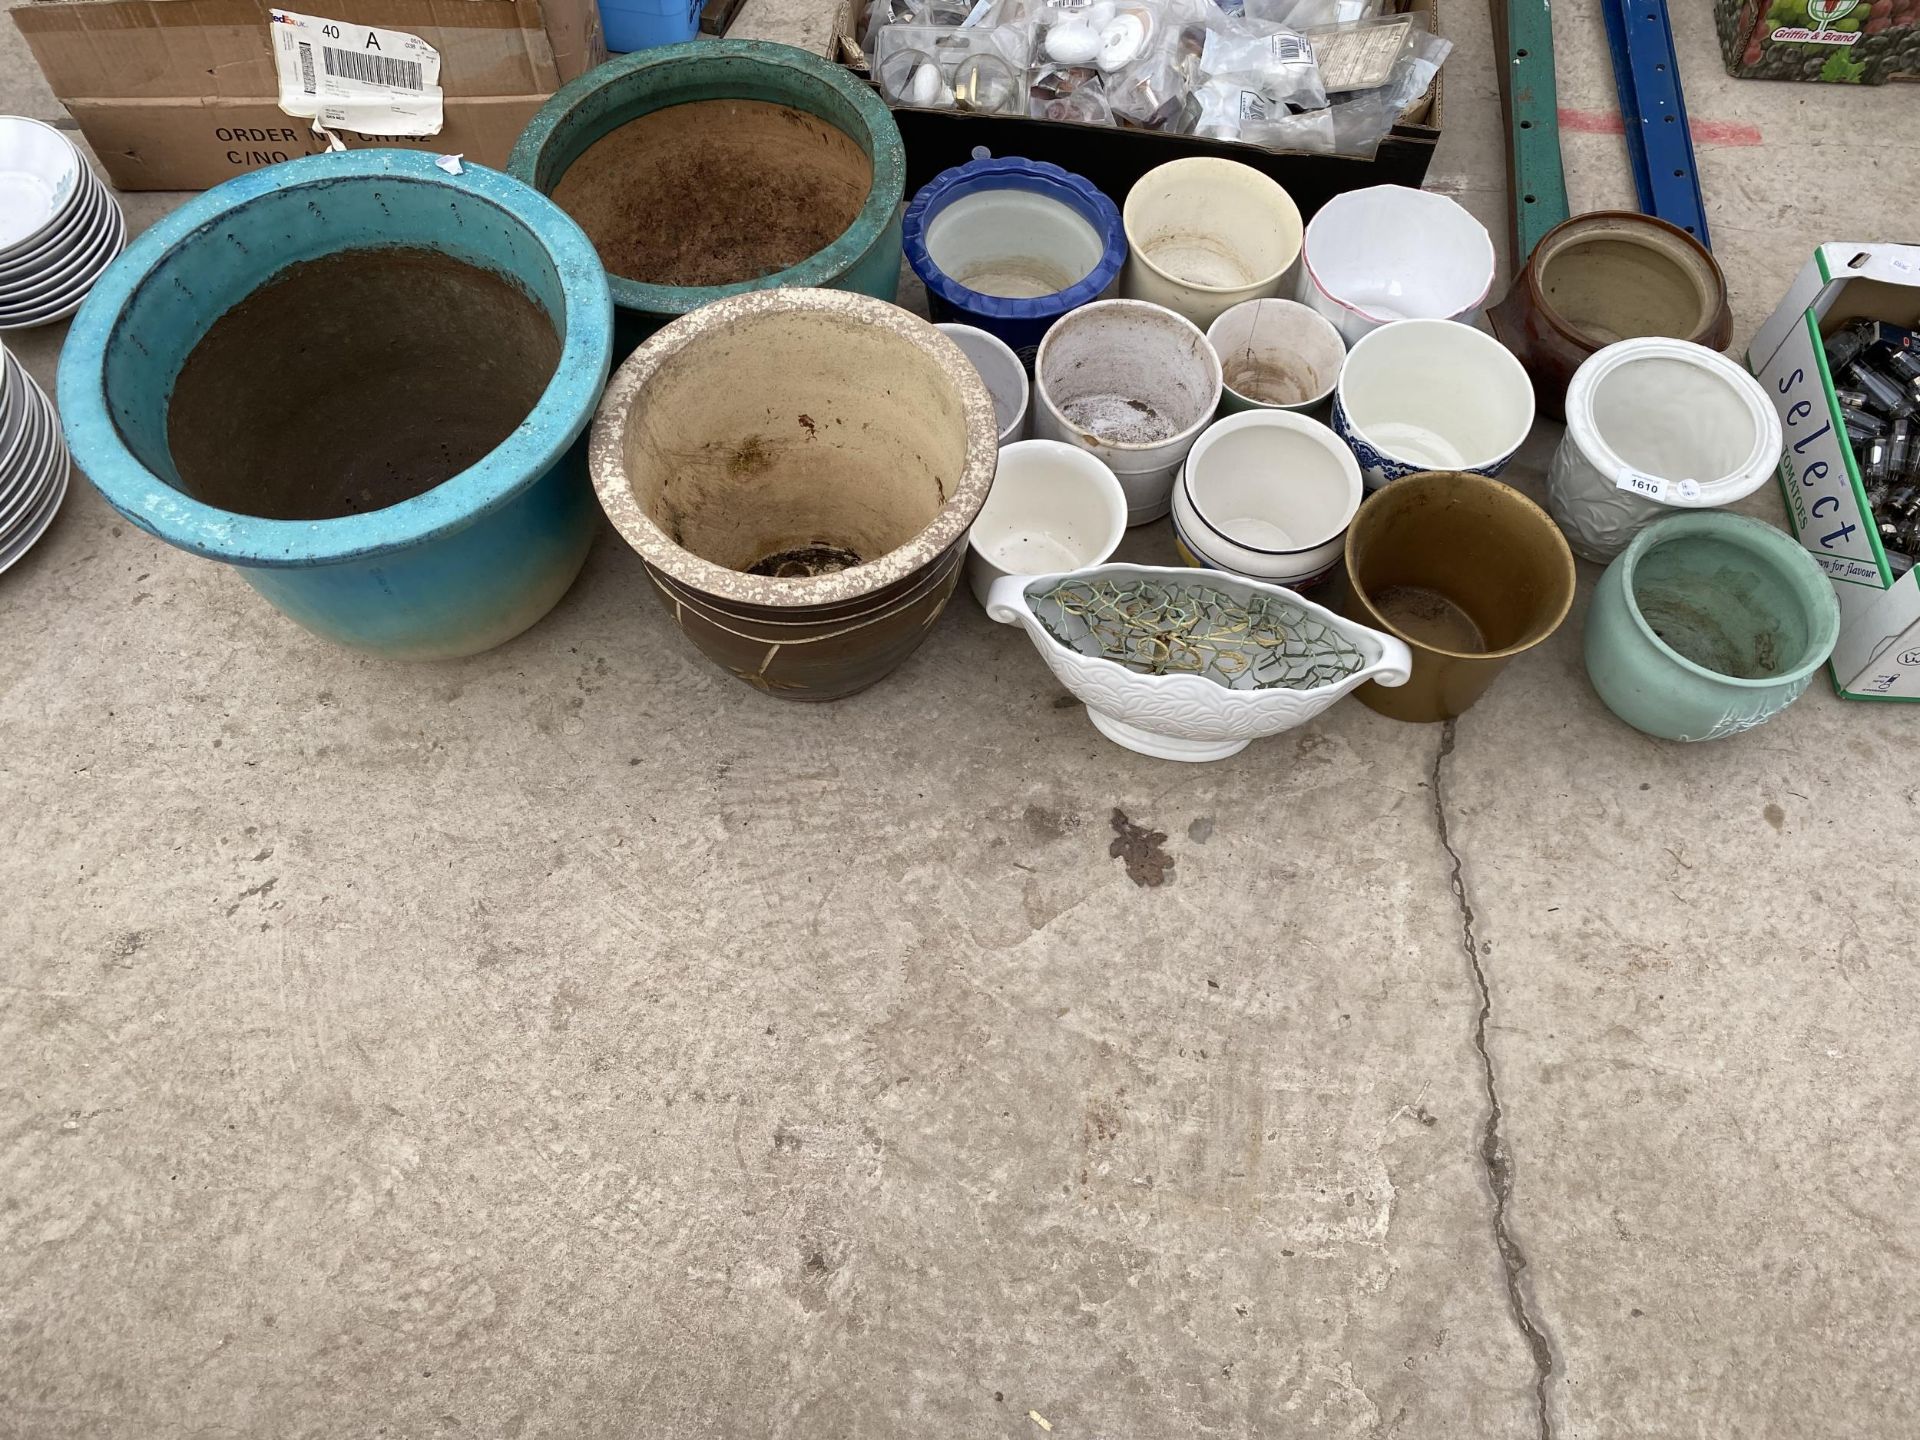 A LARGE ASSORTMENT OF GLAZED AND CERAMIC PLANTERS AND POTS